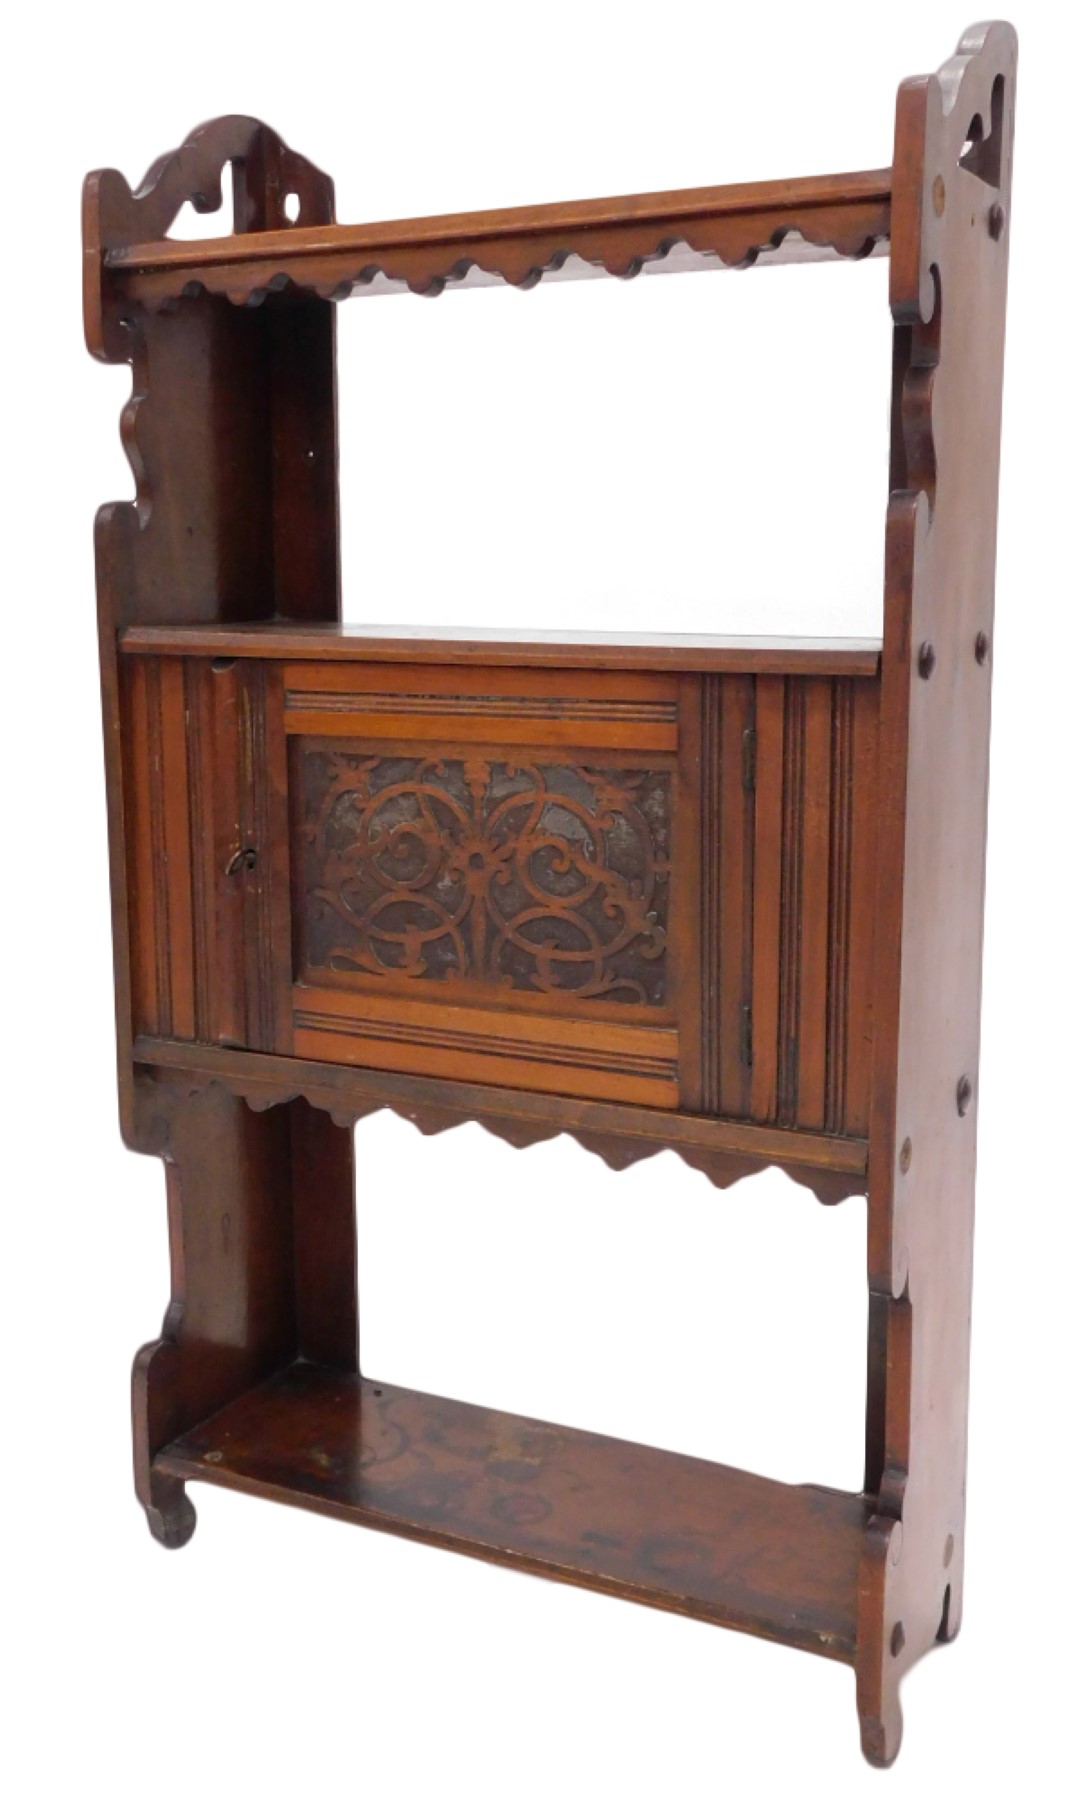 A late 19thC walnut hanging cupboard, with three shelves and a panelled door, on shaped end supports